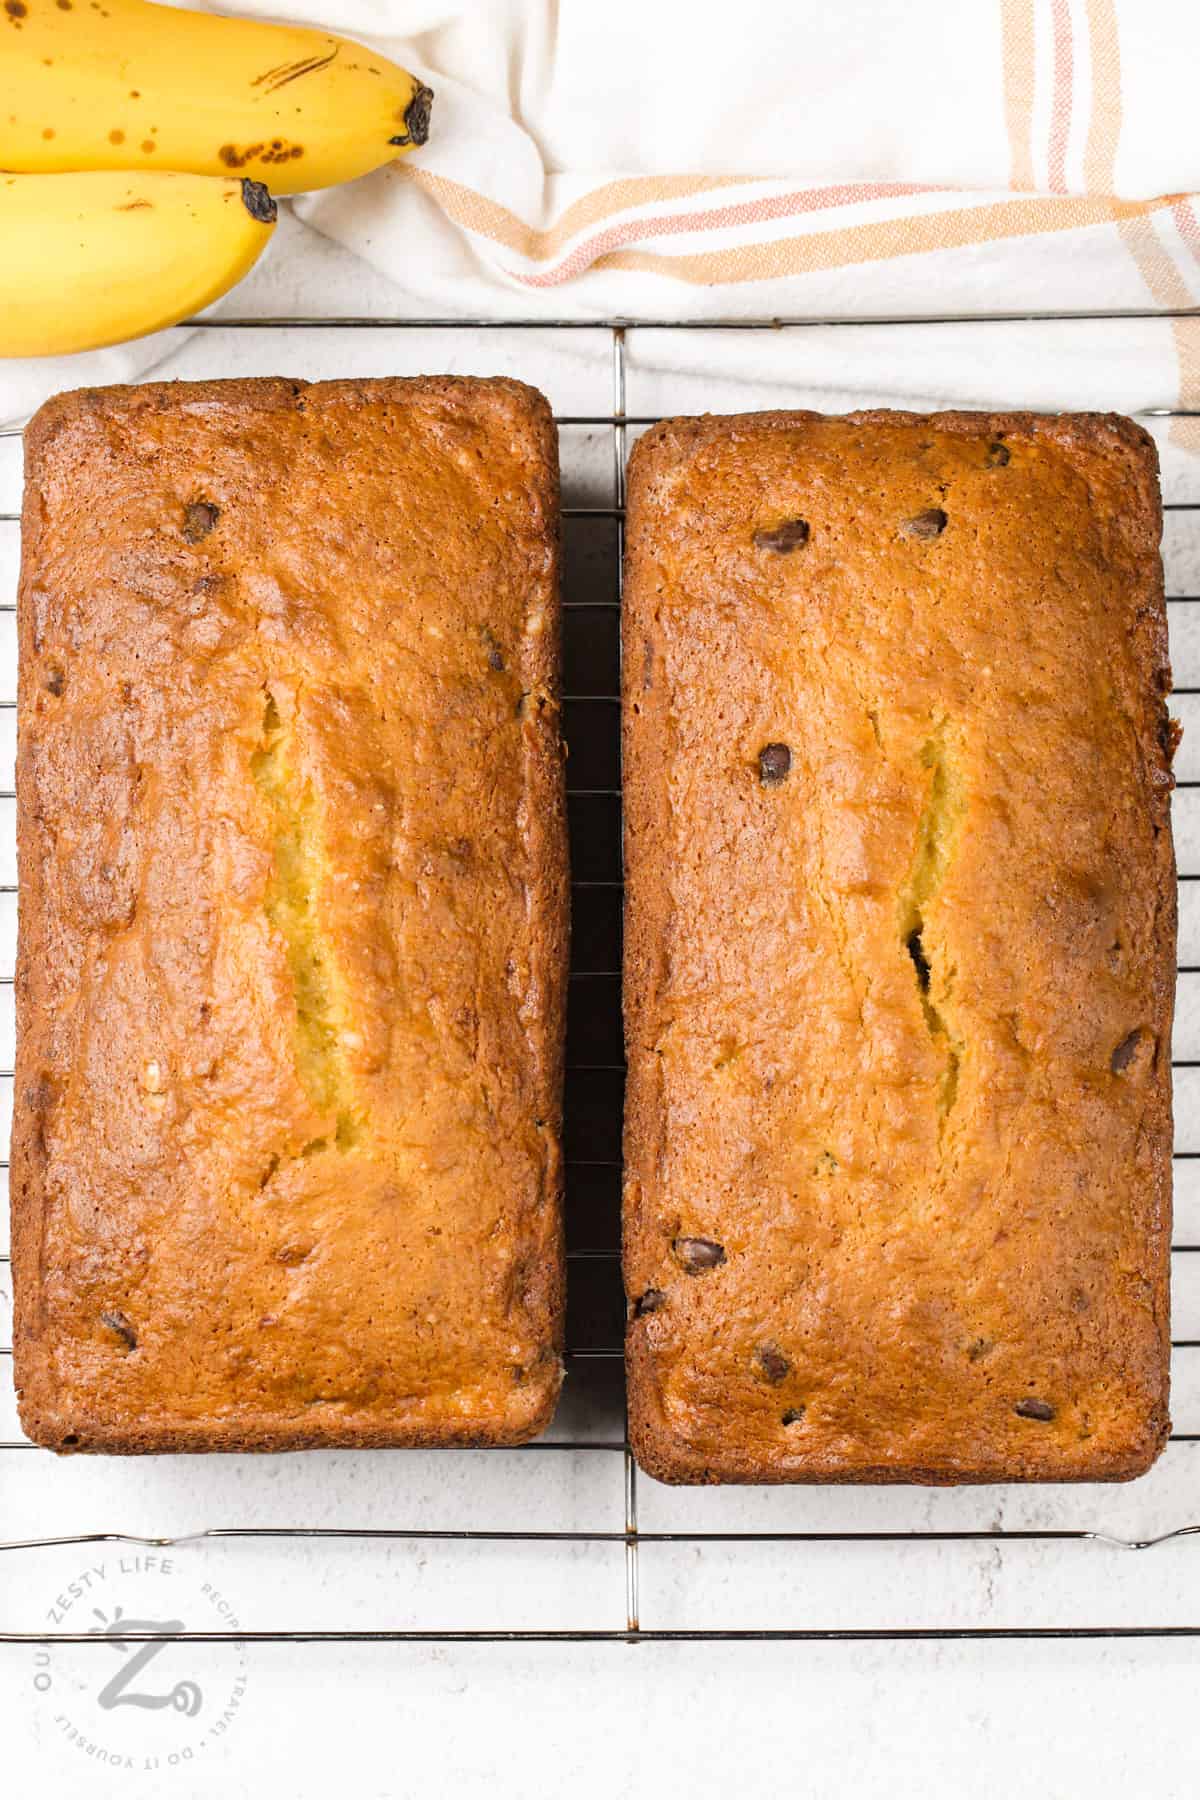 baked Cake Mix Banana Bread on a cooling rack